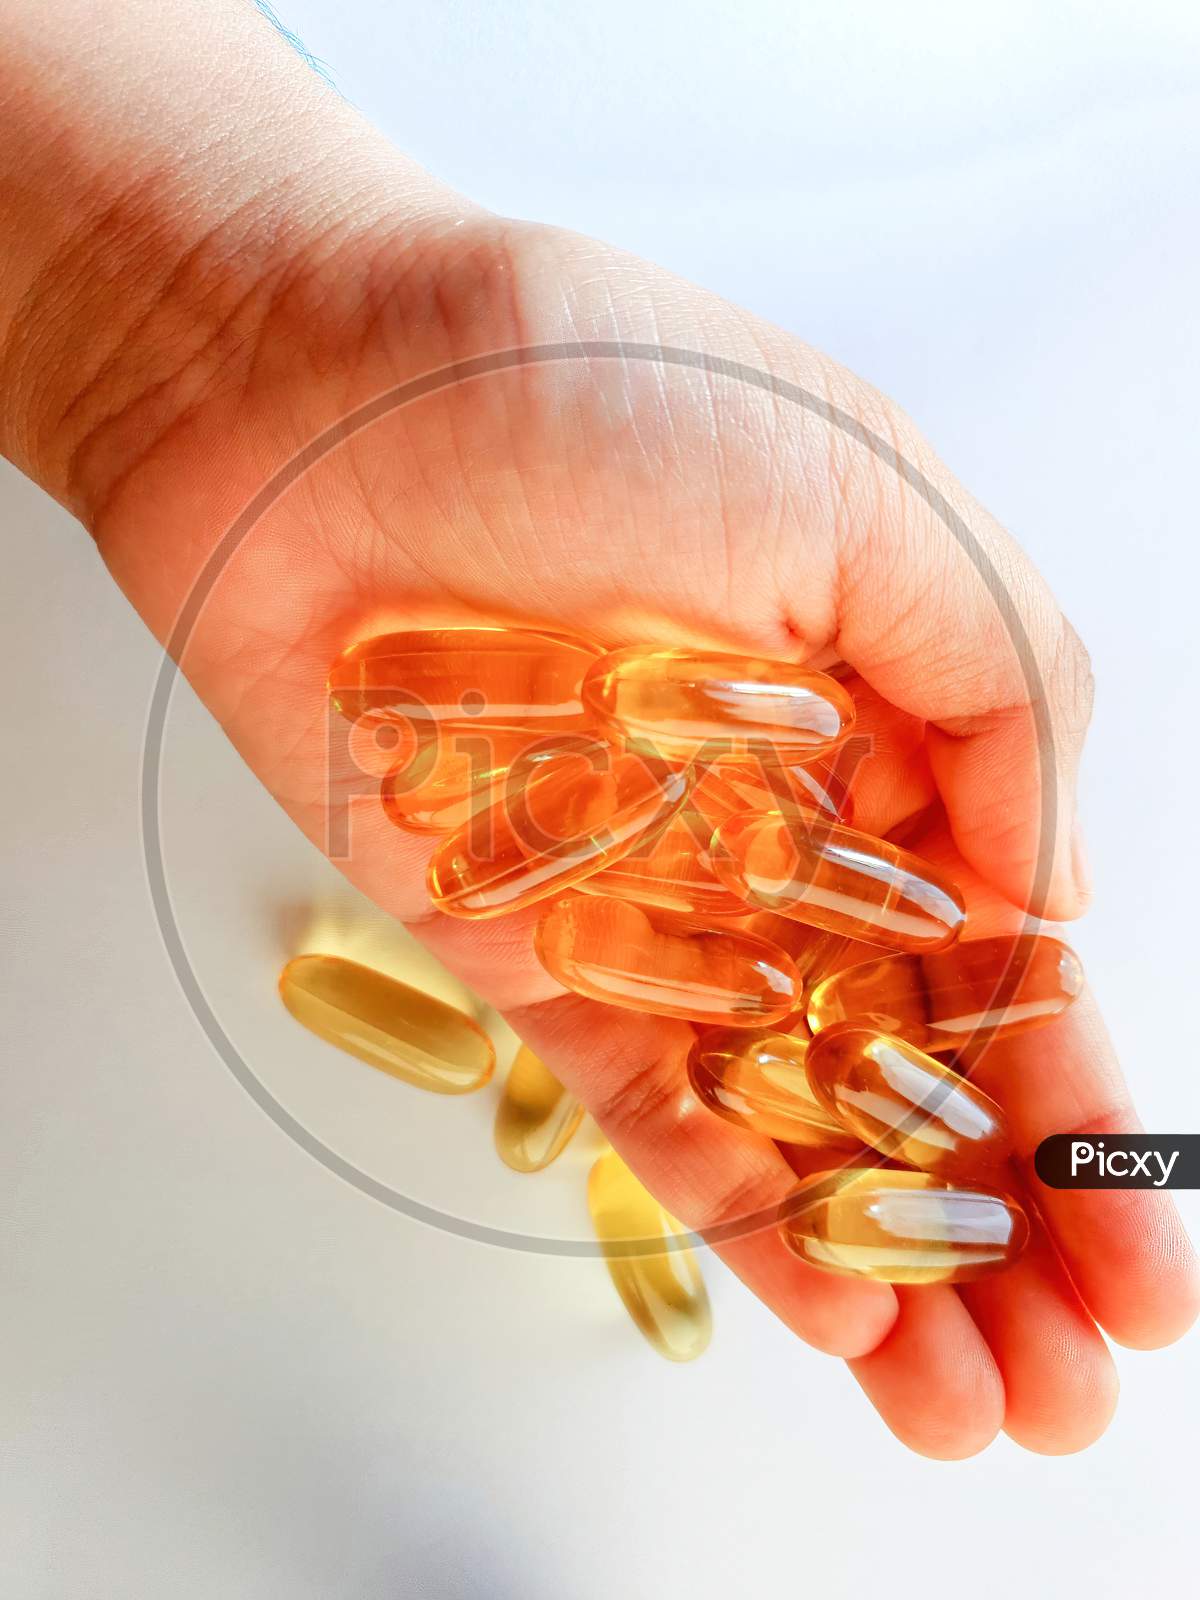 Fish Oil Capsules With Omega 3 And Vitamin D For Daily Supplement, Healthy Diet, Holding On Hand